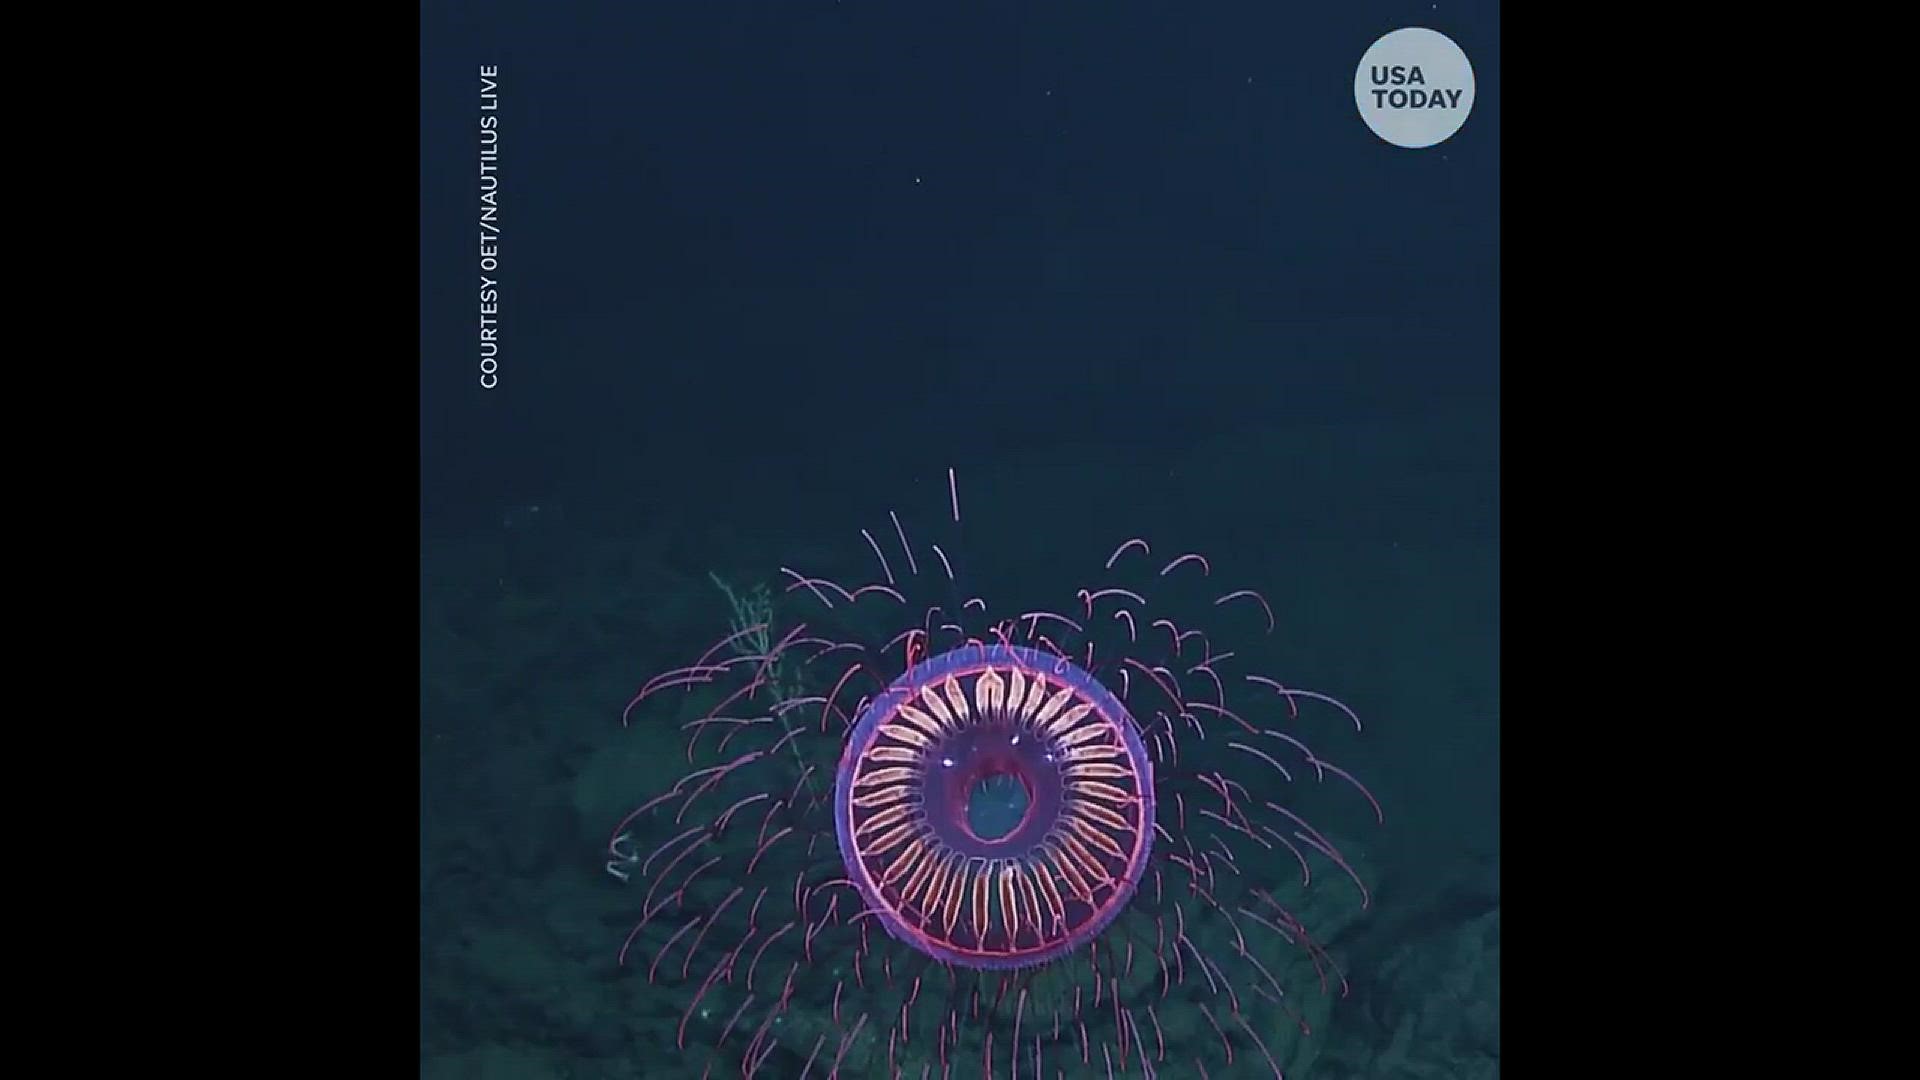 Researchers took a deep dive about 300 miles off Baja California and found a rare species of jellyfish called the 'Halitrephes maasi' jelly. It's tentacles reflect light causing it to look like a firework bursting under the sea.